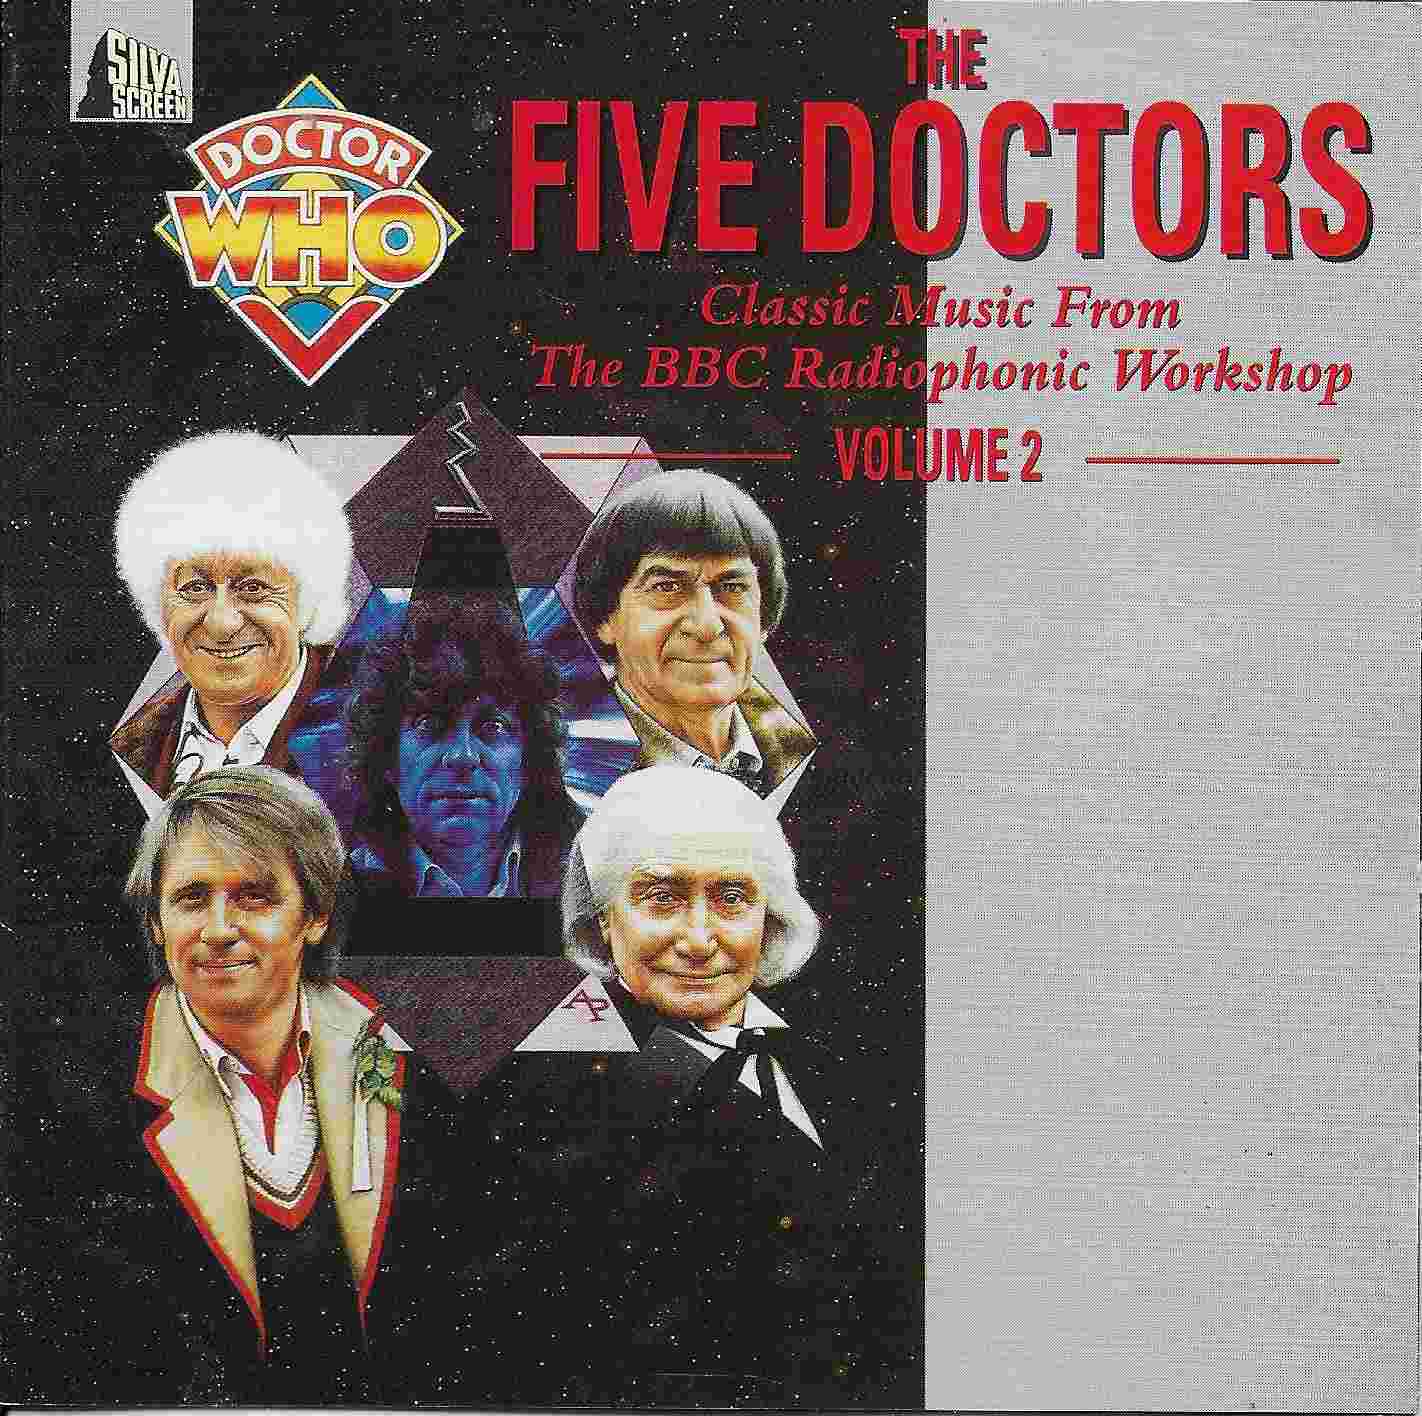 Picture of FILMCD 710 The five doctors - Doctor who the music - Volume 2 by artist Various from the BBC cds - Records and Tapes library